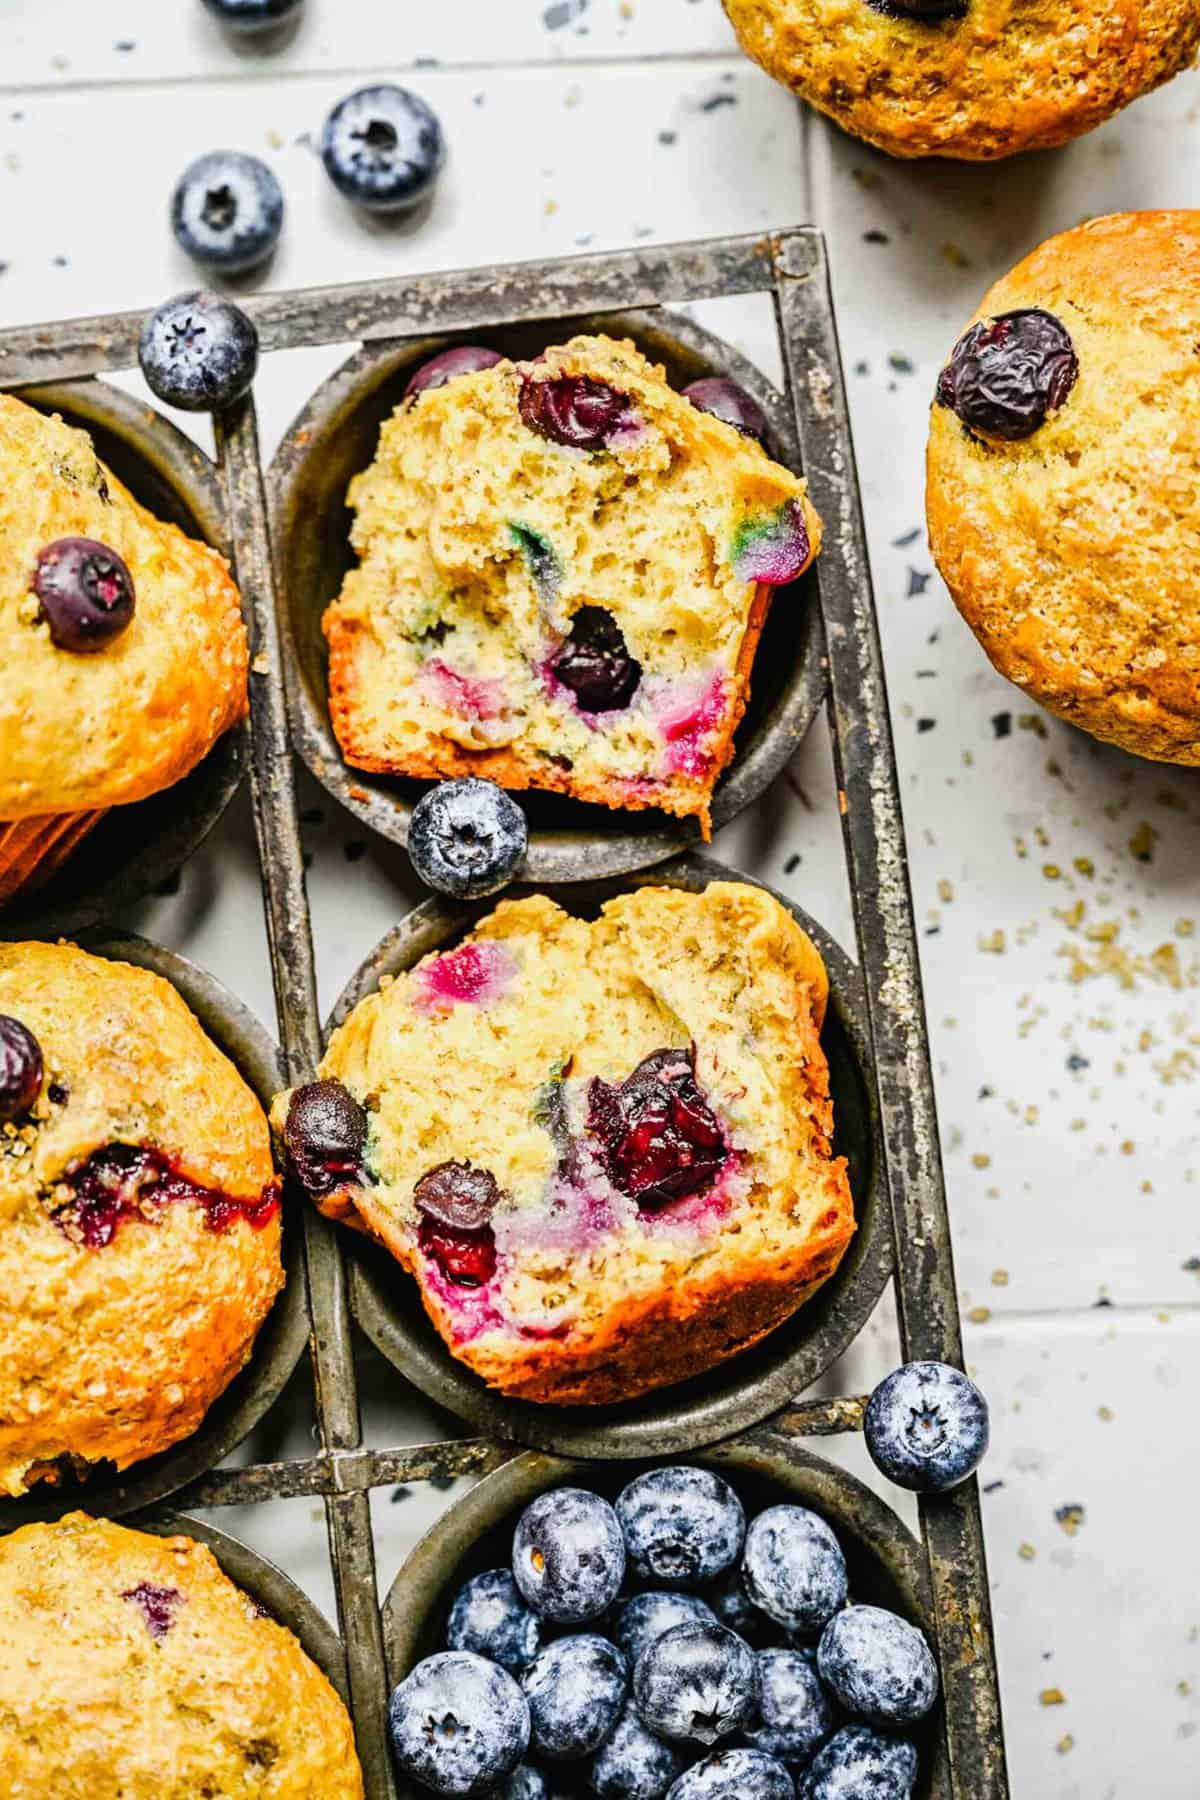 A banana blueberry muffins sliced in half next to whole muffins and fresh blueberries.